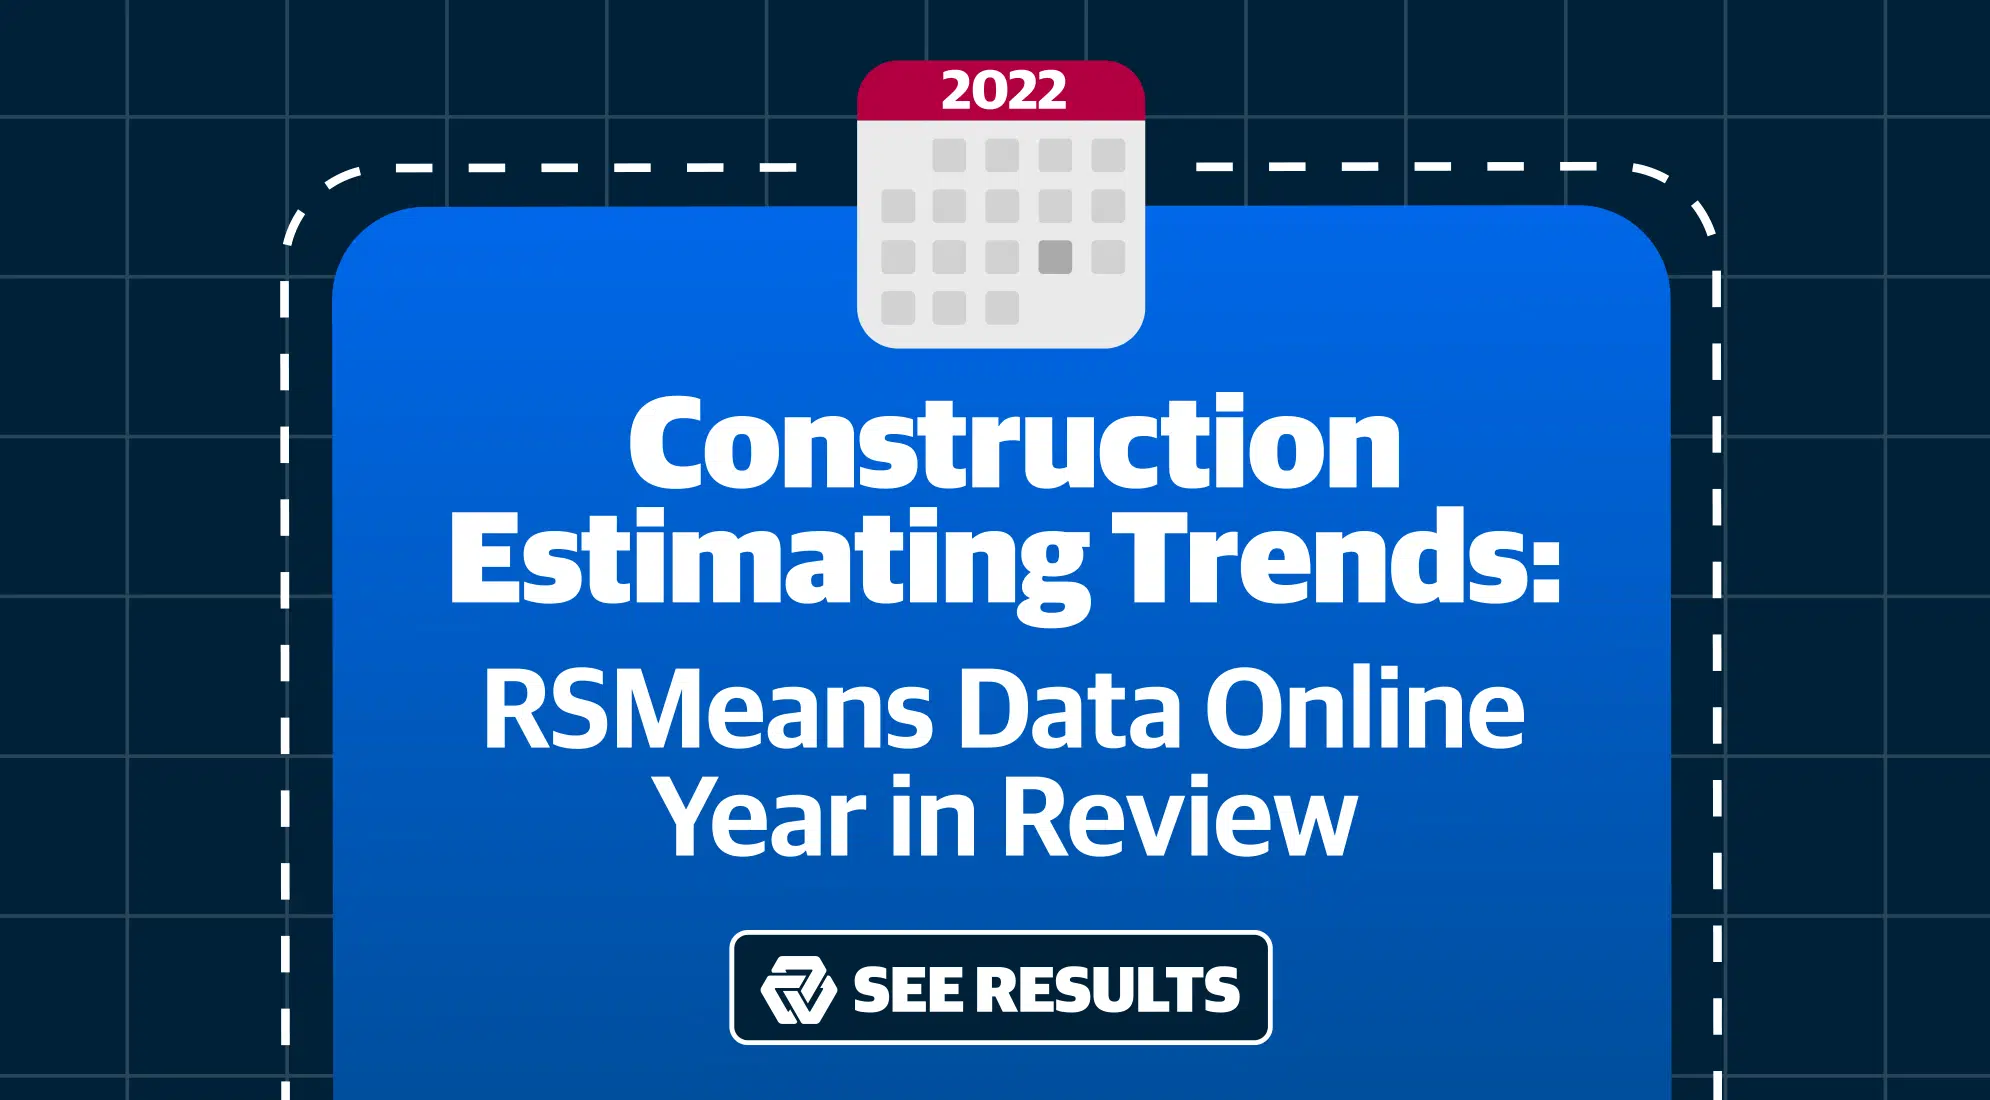 2022 Construction Estimating Trends: RSMeans Data Online Year in Review 2